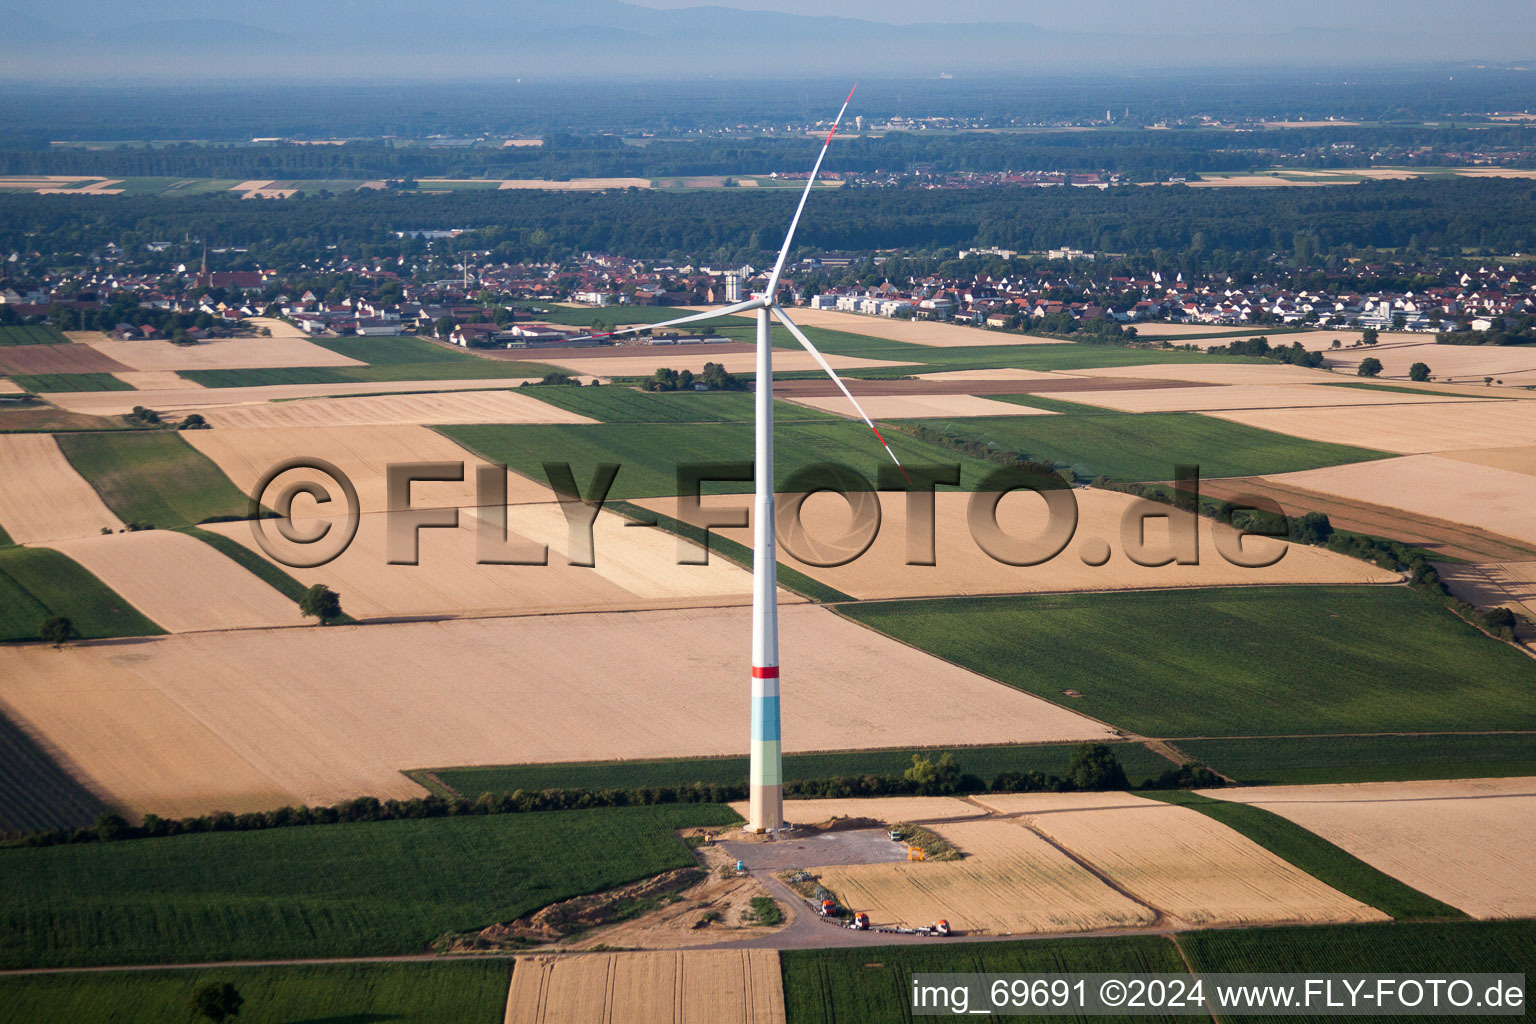 Wind farm construction in Offenbach an der Queich in the state Rhineland-Palatinate, Germany seen from above